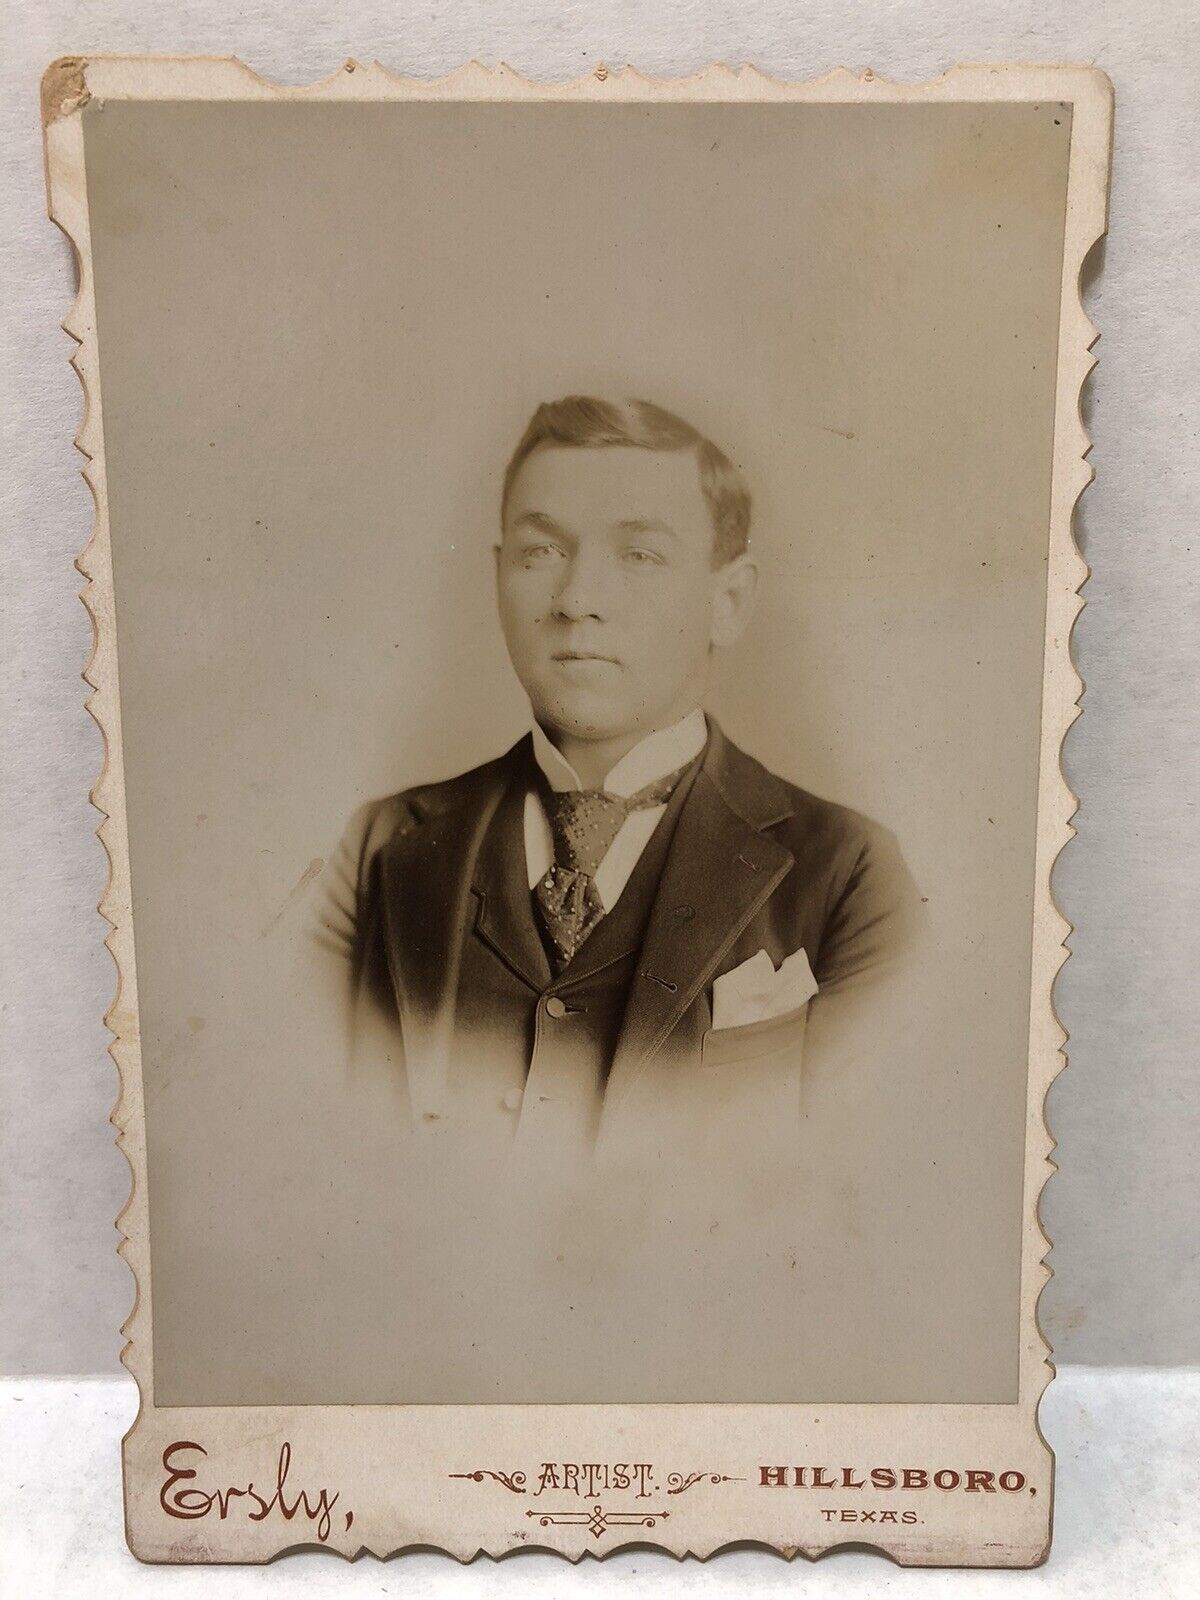 Antique 1800s Cabinet Card Photo of Identified YOUNG MAN - Hillsboro TEXAS